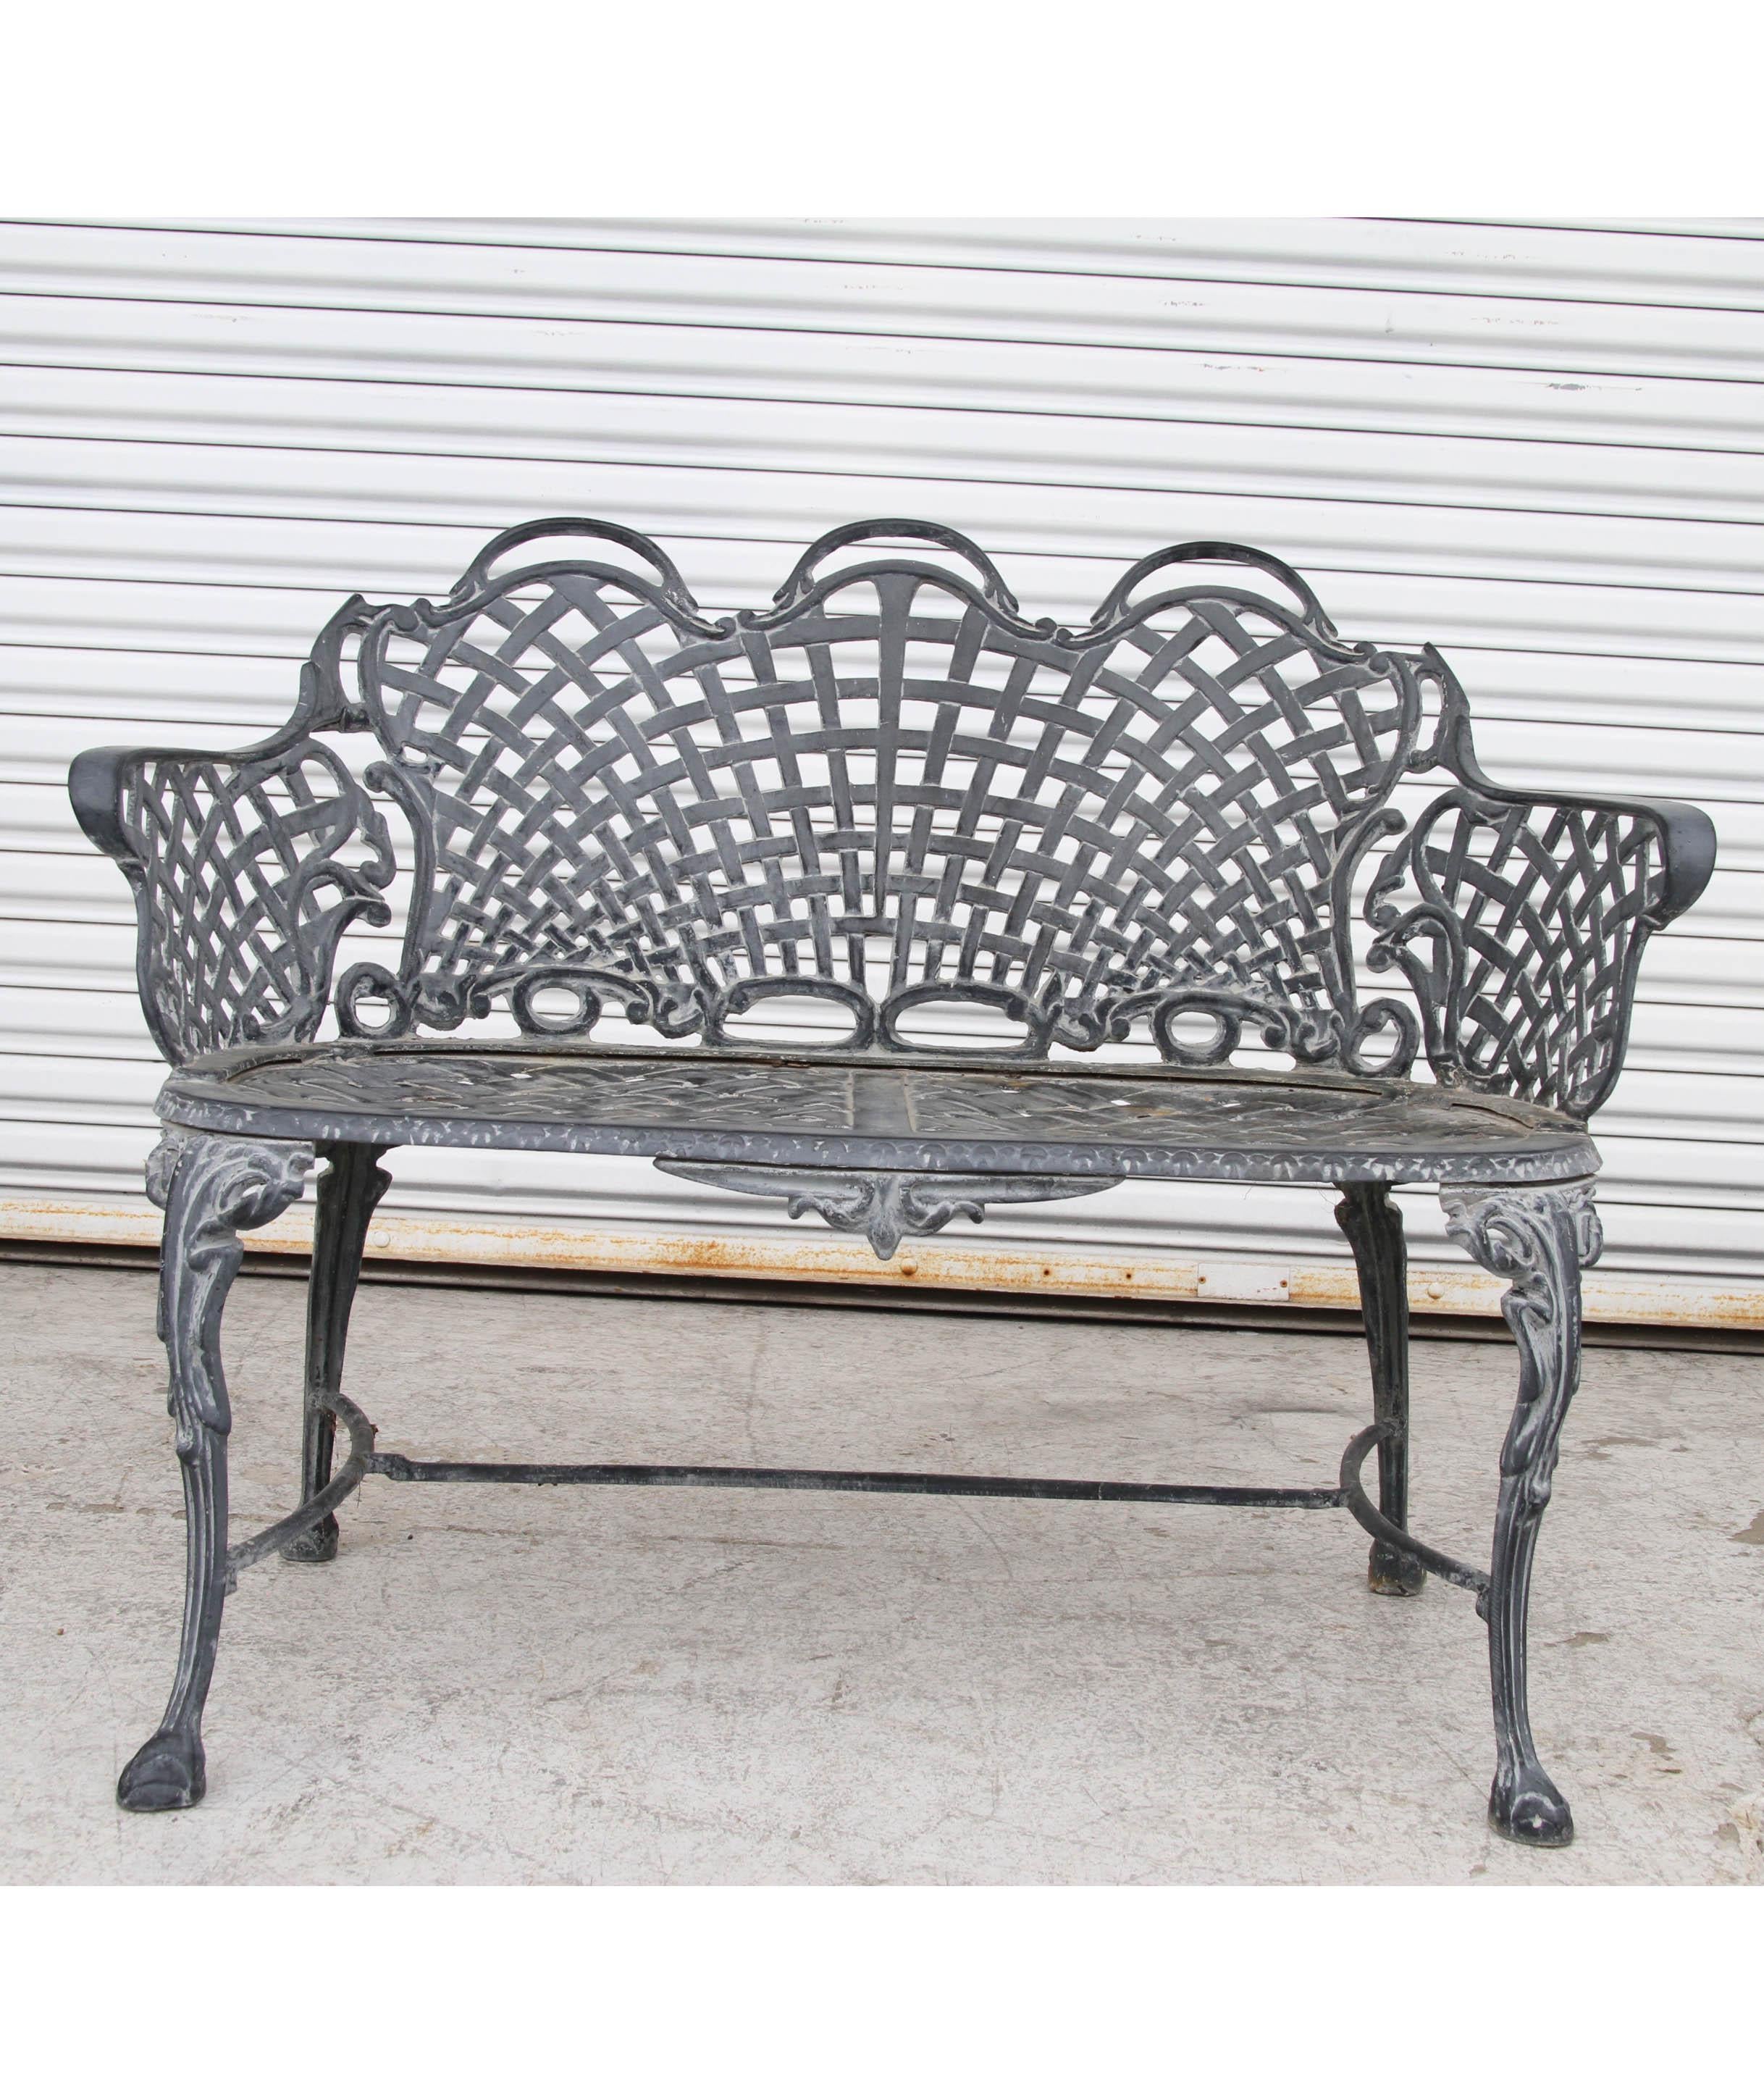 Basketweave cast aluminum triple arch settee

This basket weave triple arch bench is a striking addition to home, patio, terrace or that secret nook in the garden. American made in Cast Aluminum and painted by hand. 

Measures: 32